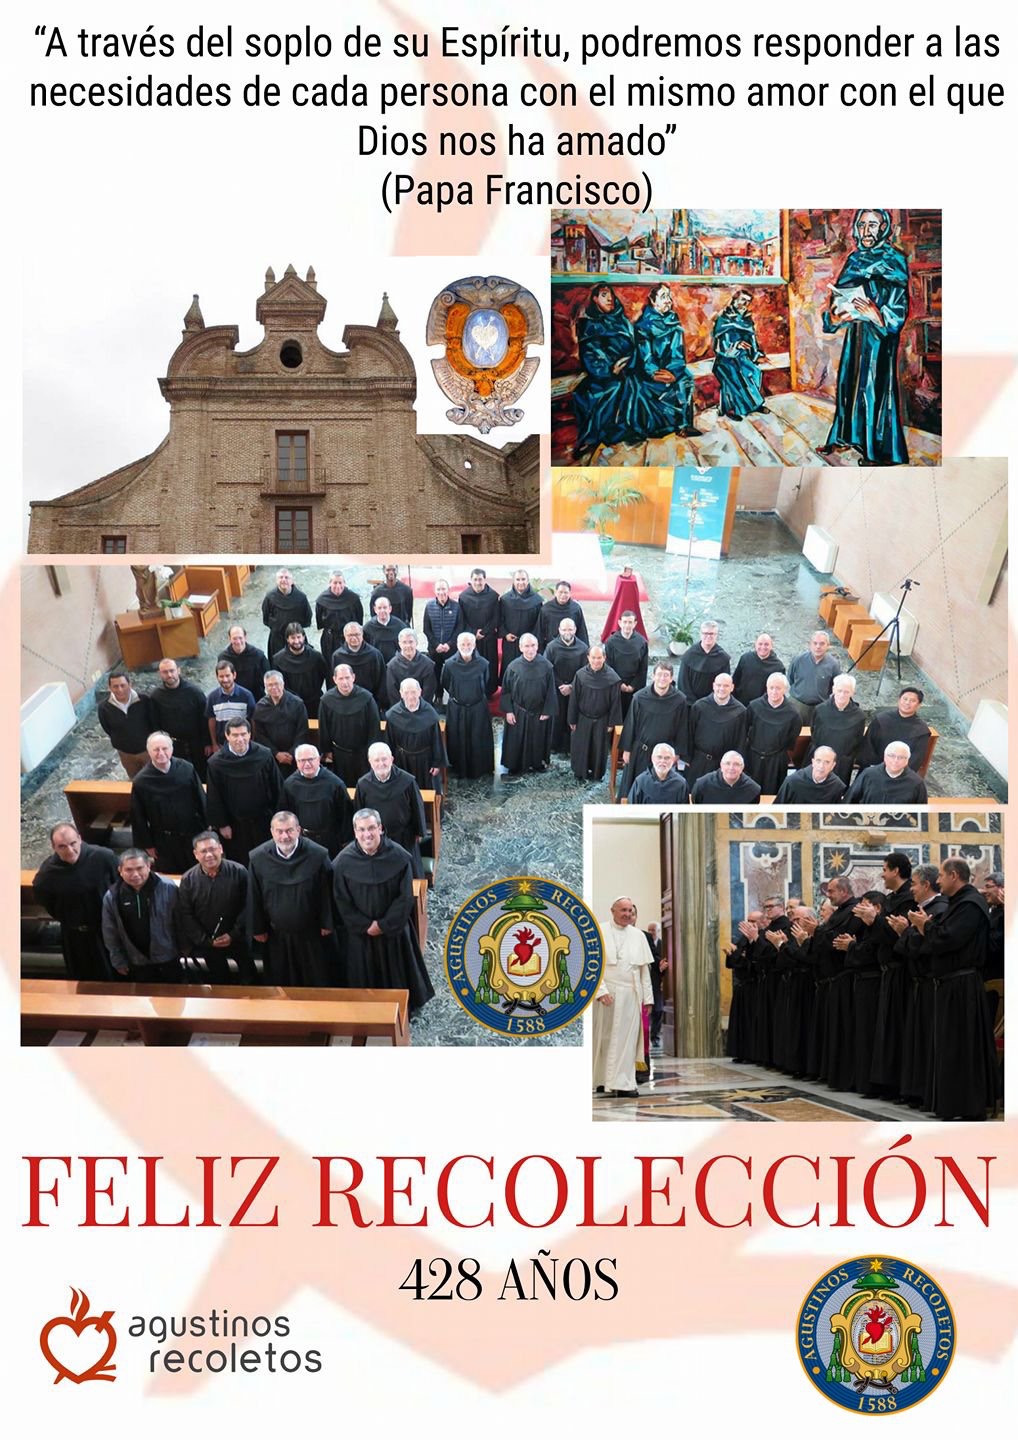 The Order celebrates in all the world, and in different ways, the Day of the Augustinian Recollection